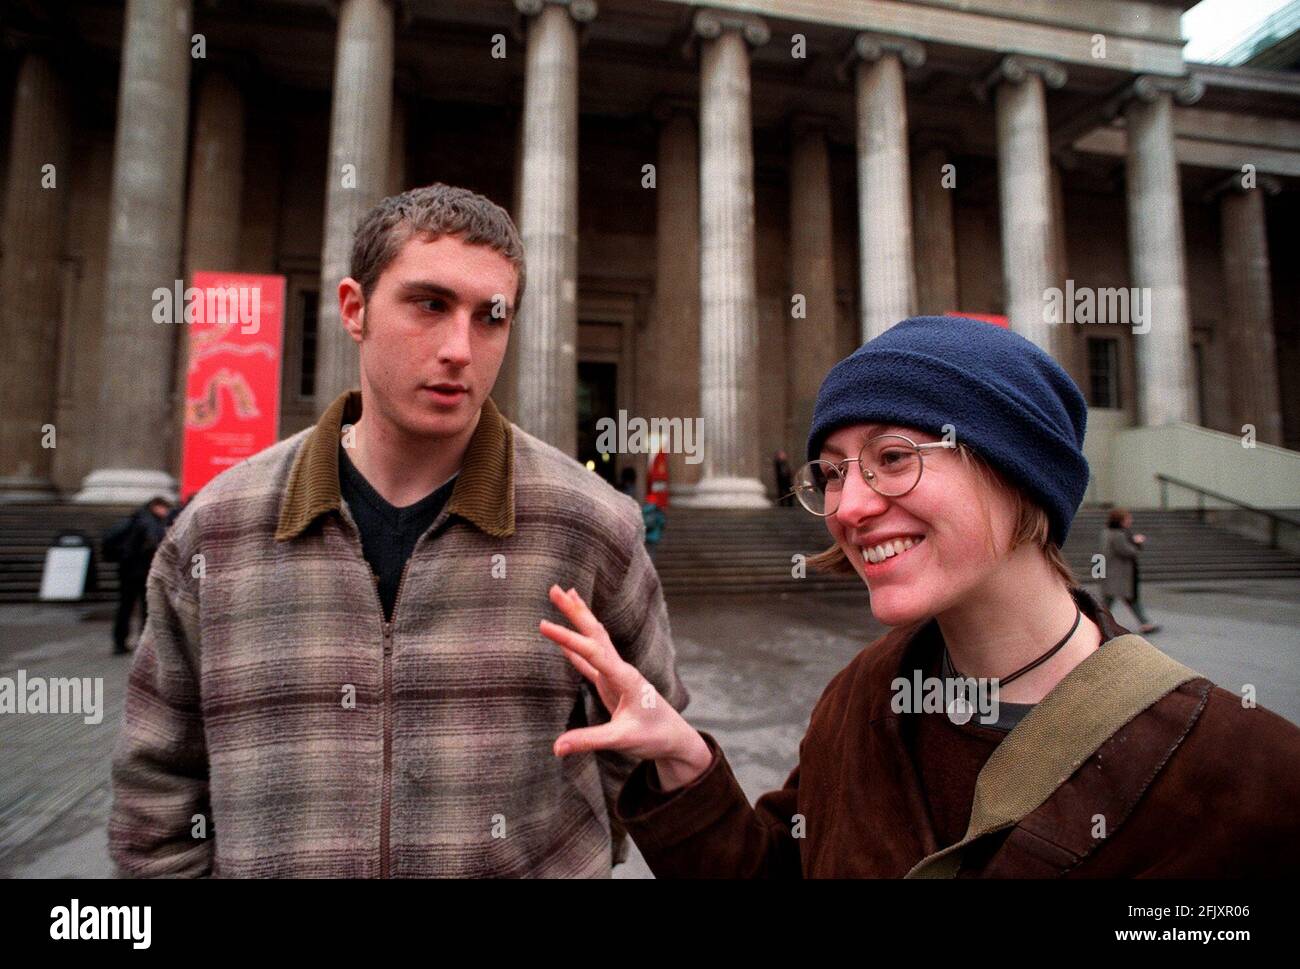 British Museum Visitors January 2000Tristram Allinson and Anna Lyons outside the British Museum Stock Photo